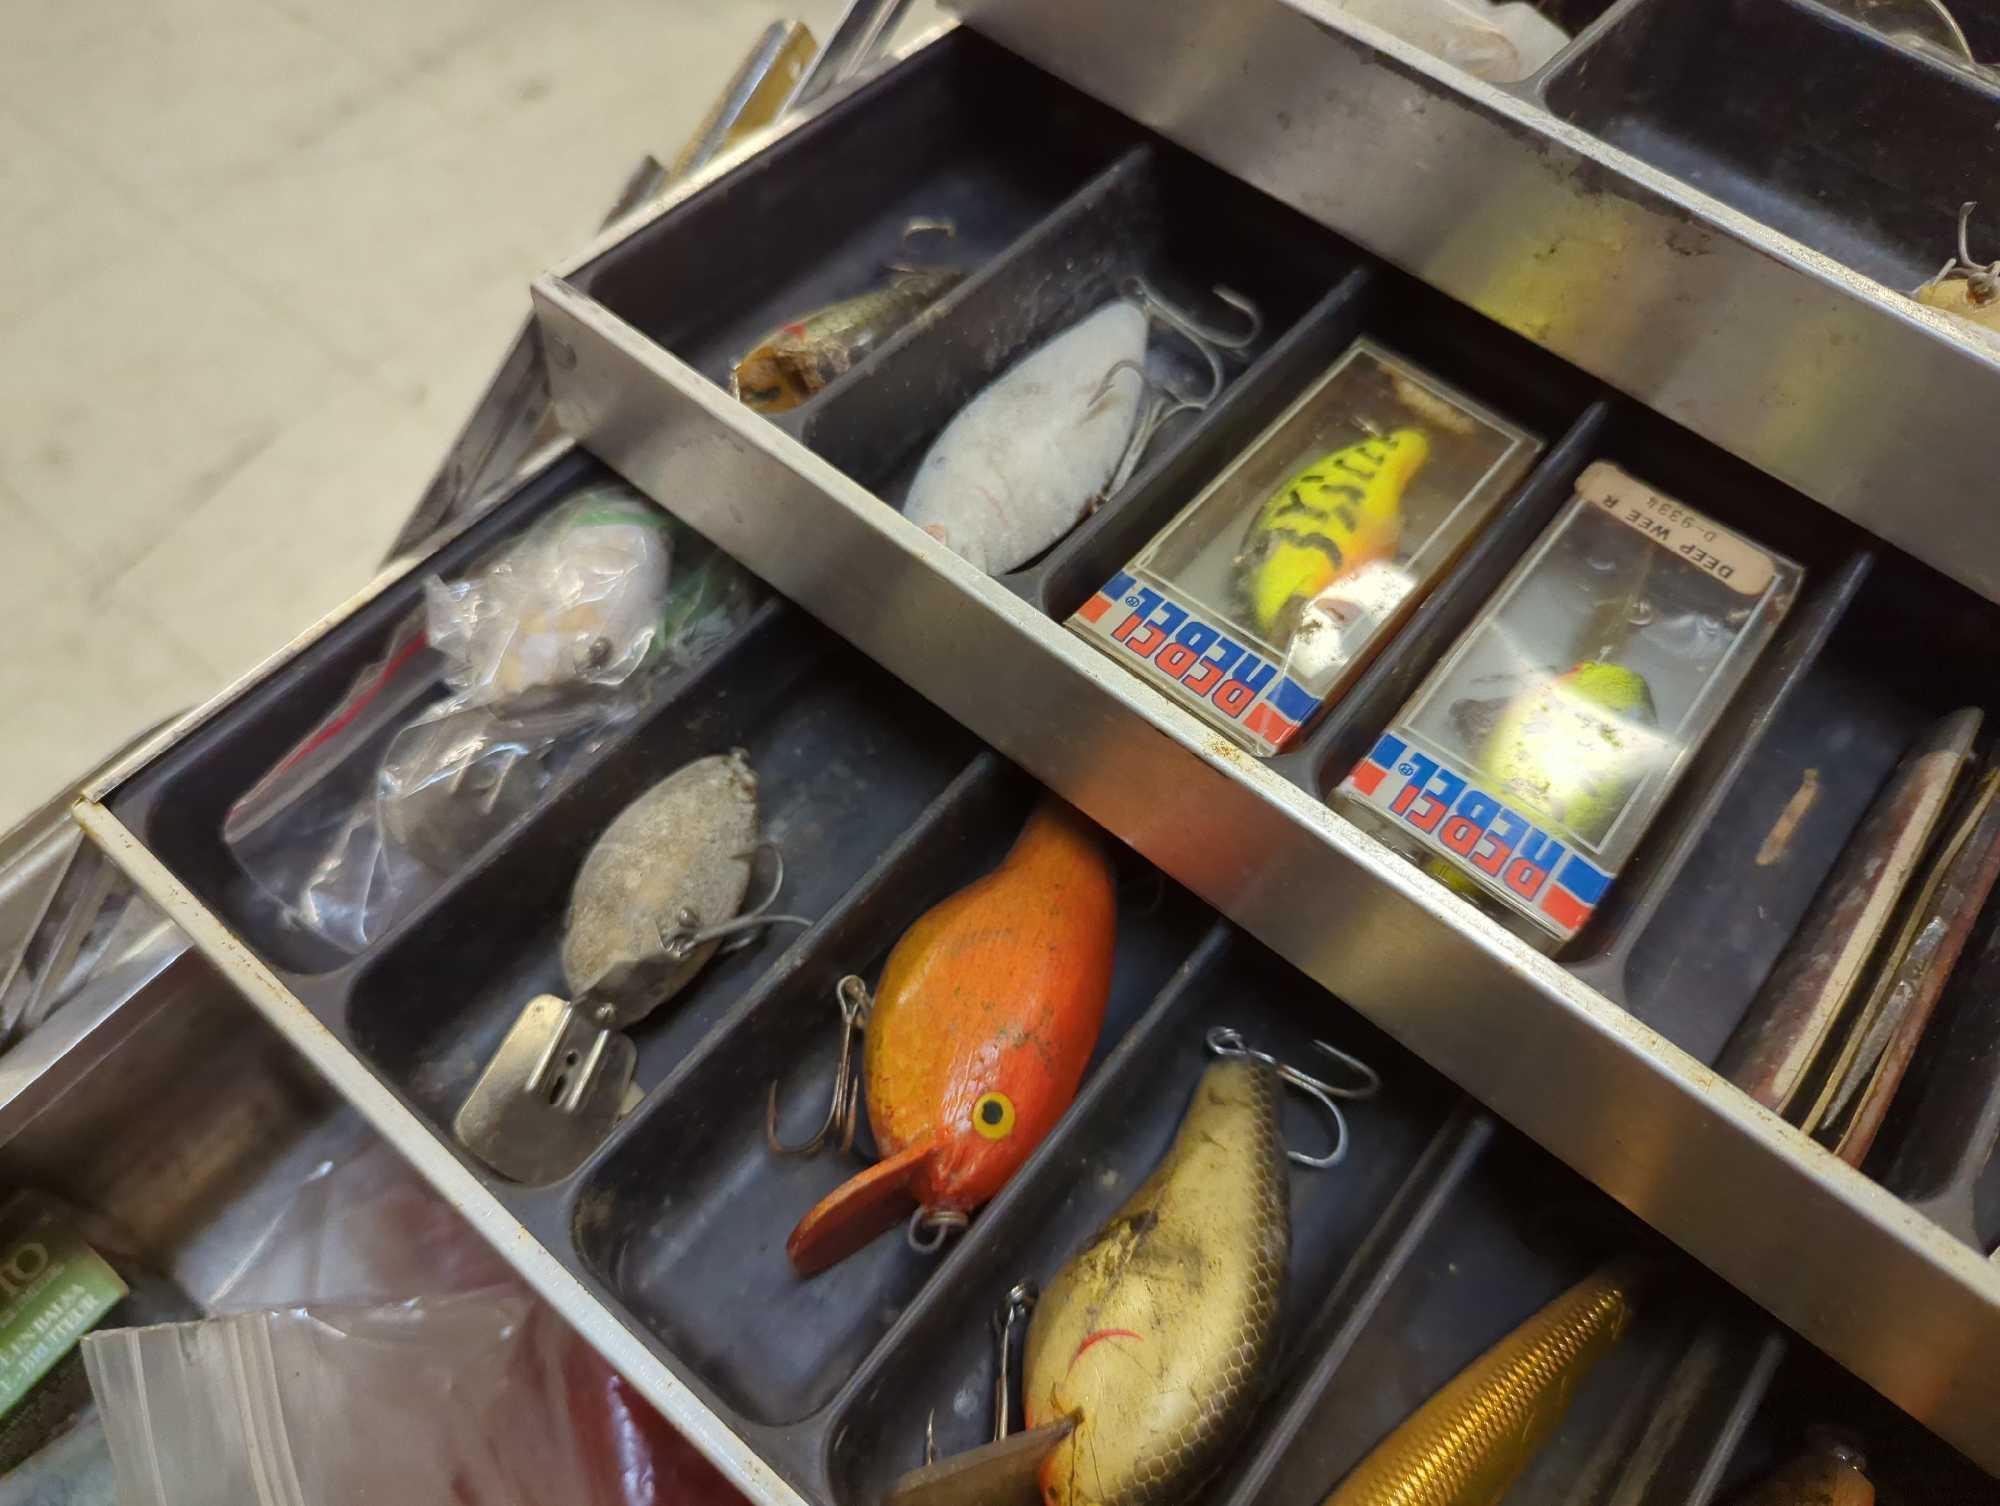 Large metal tackle box and contents including various fishing lures and other fishing accessories.